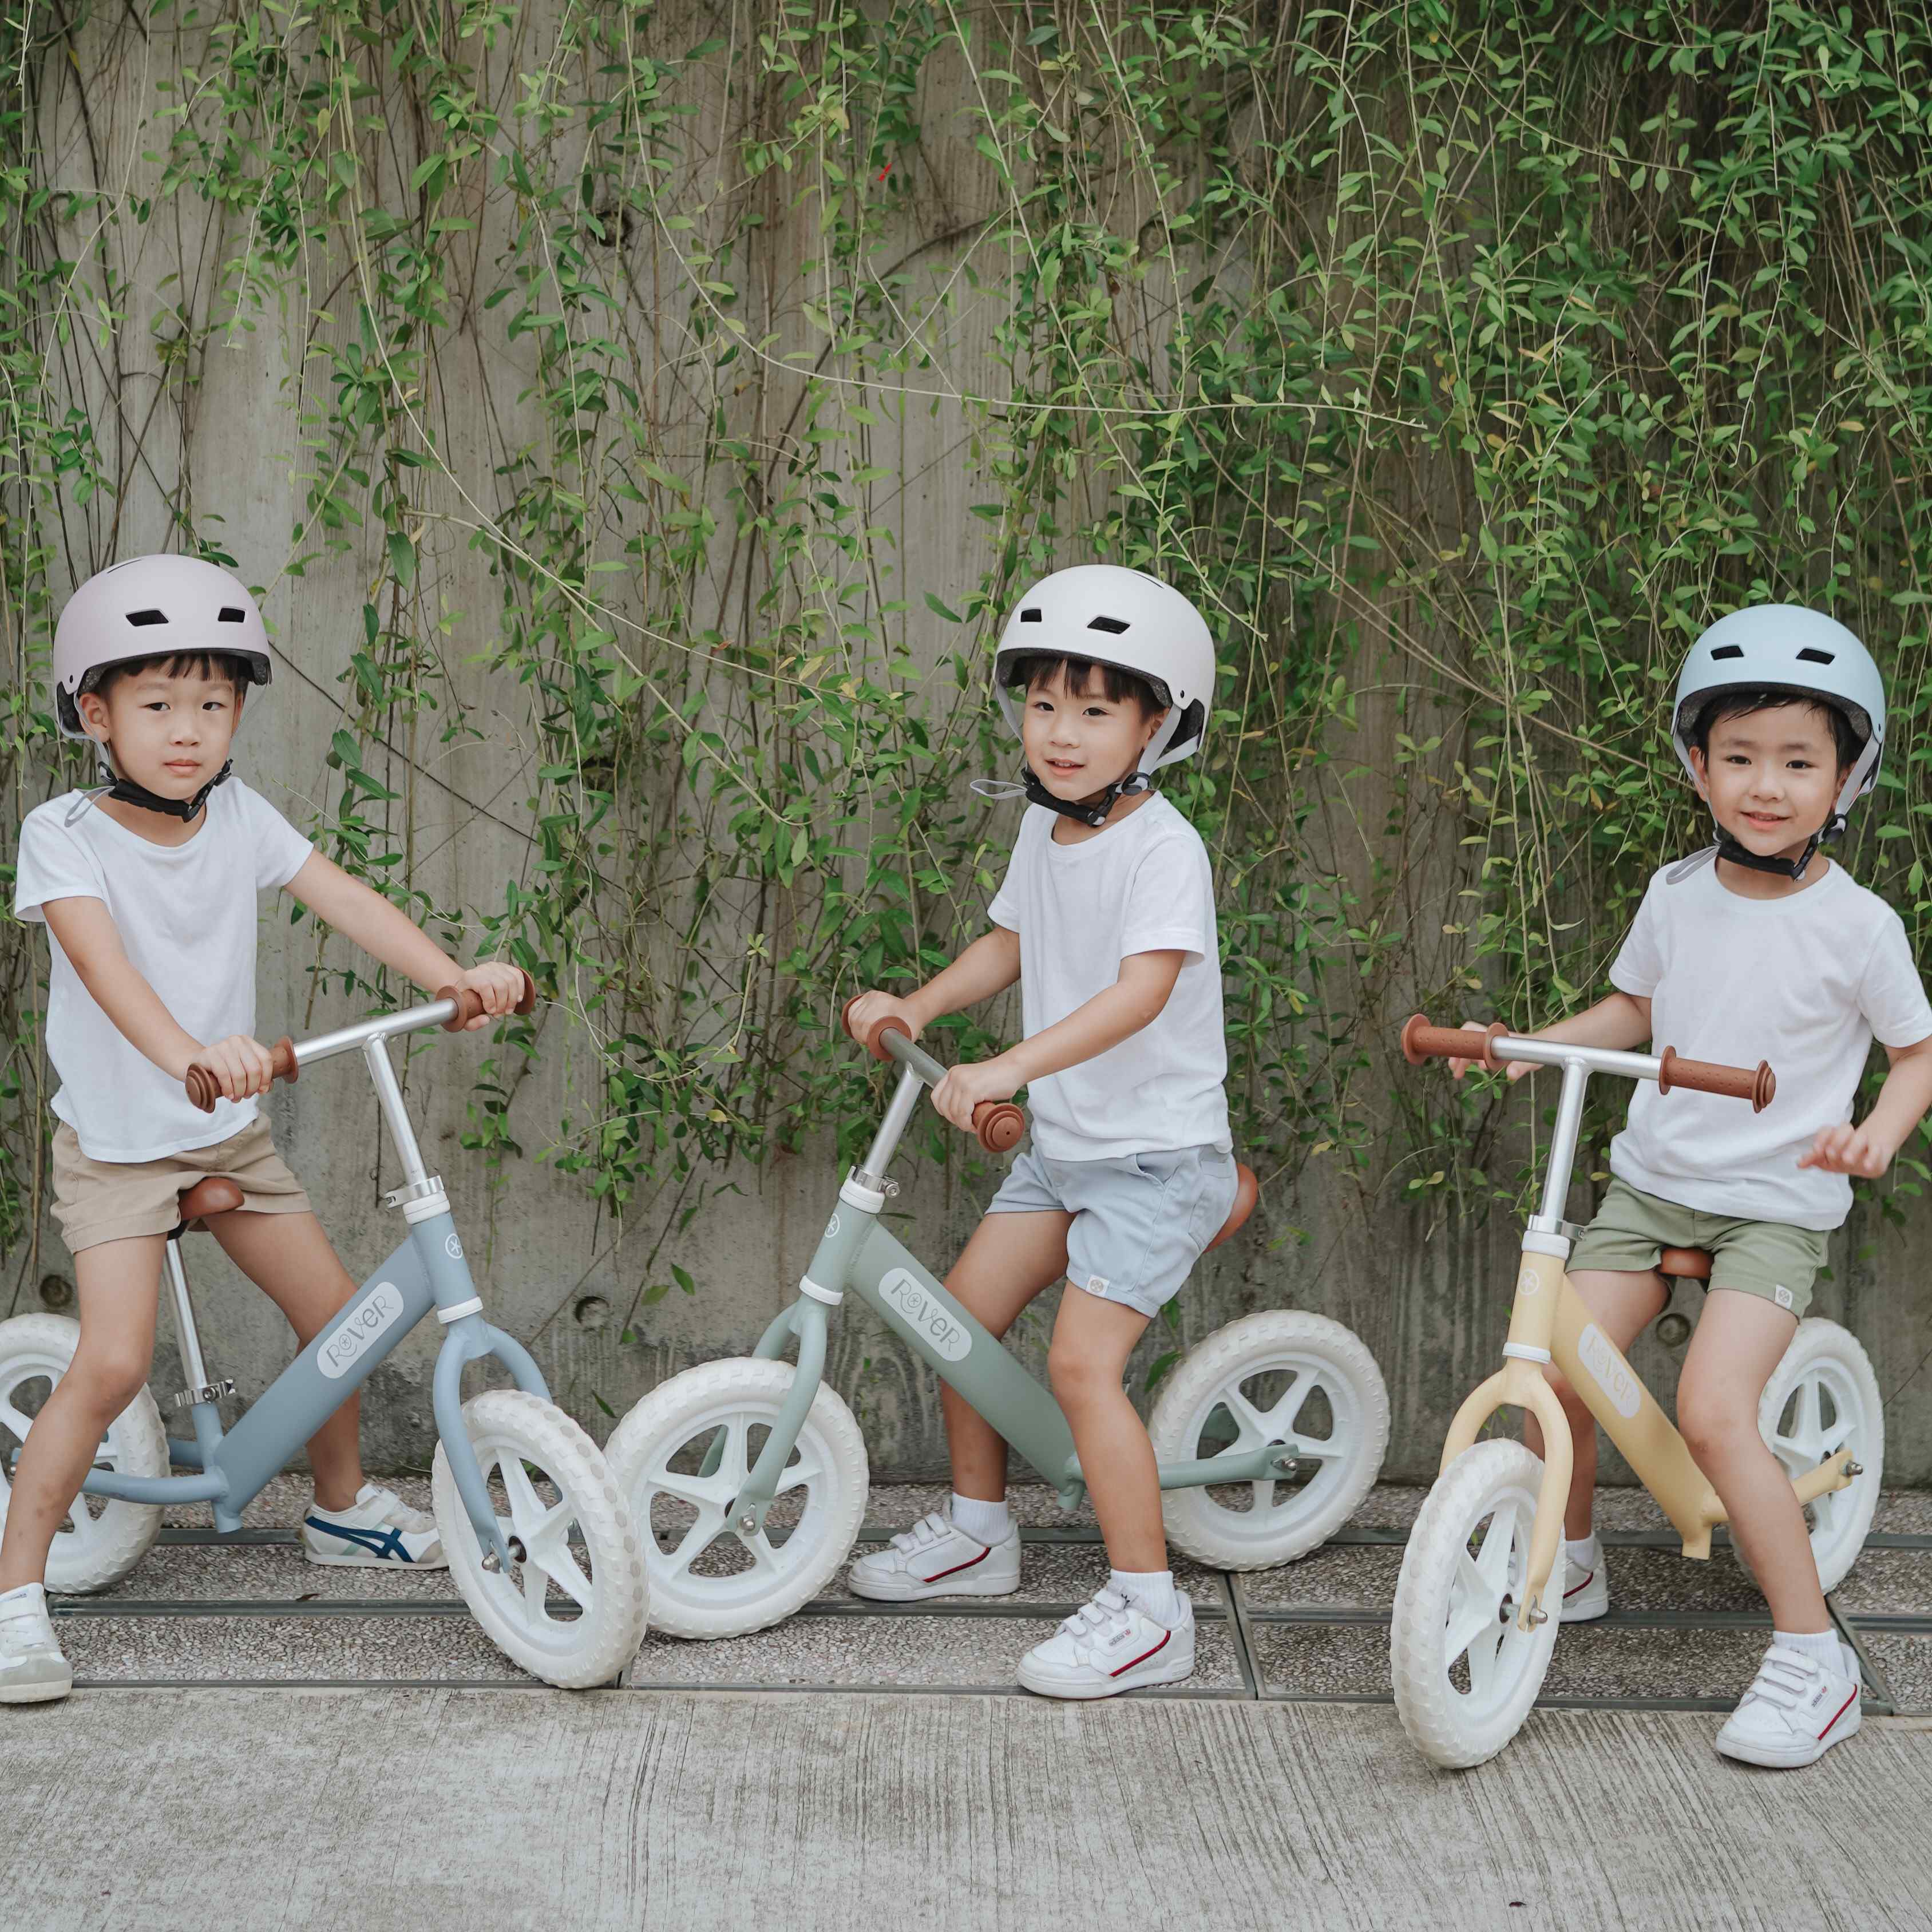 Blueberry Rover Bikes Balance Bike + Helmet (Available in assorted Sizes & Colours)